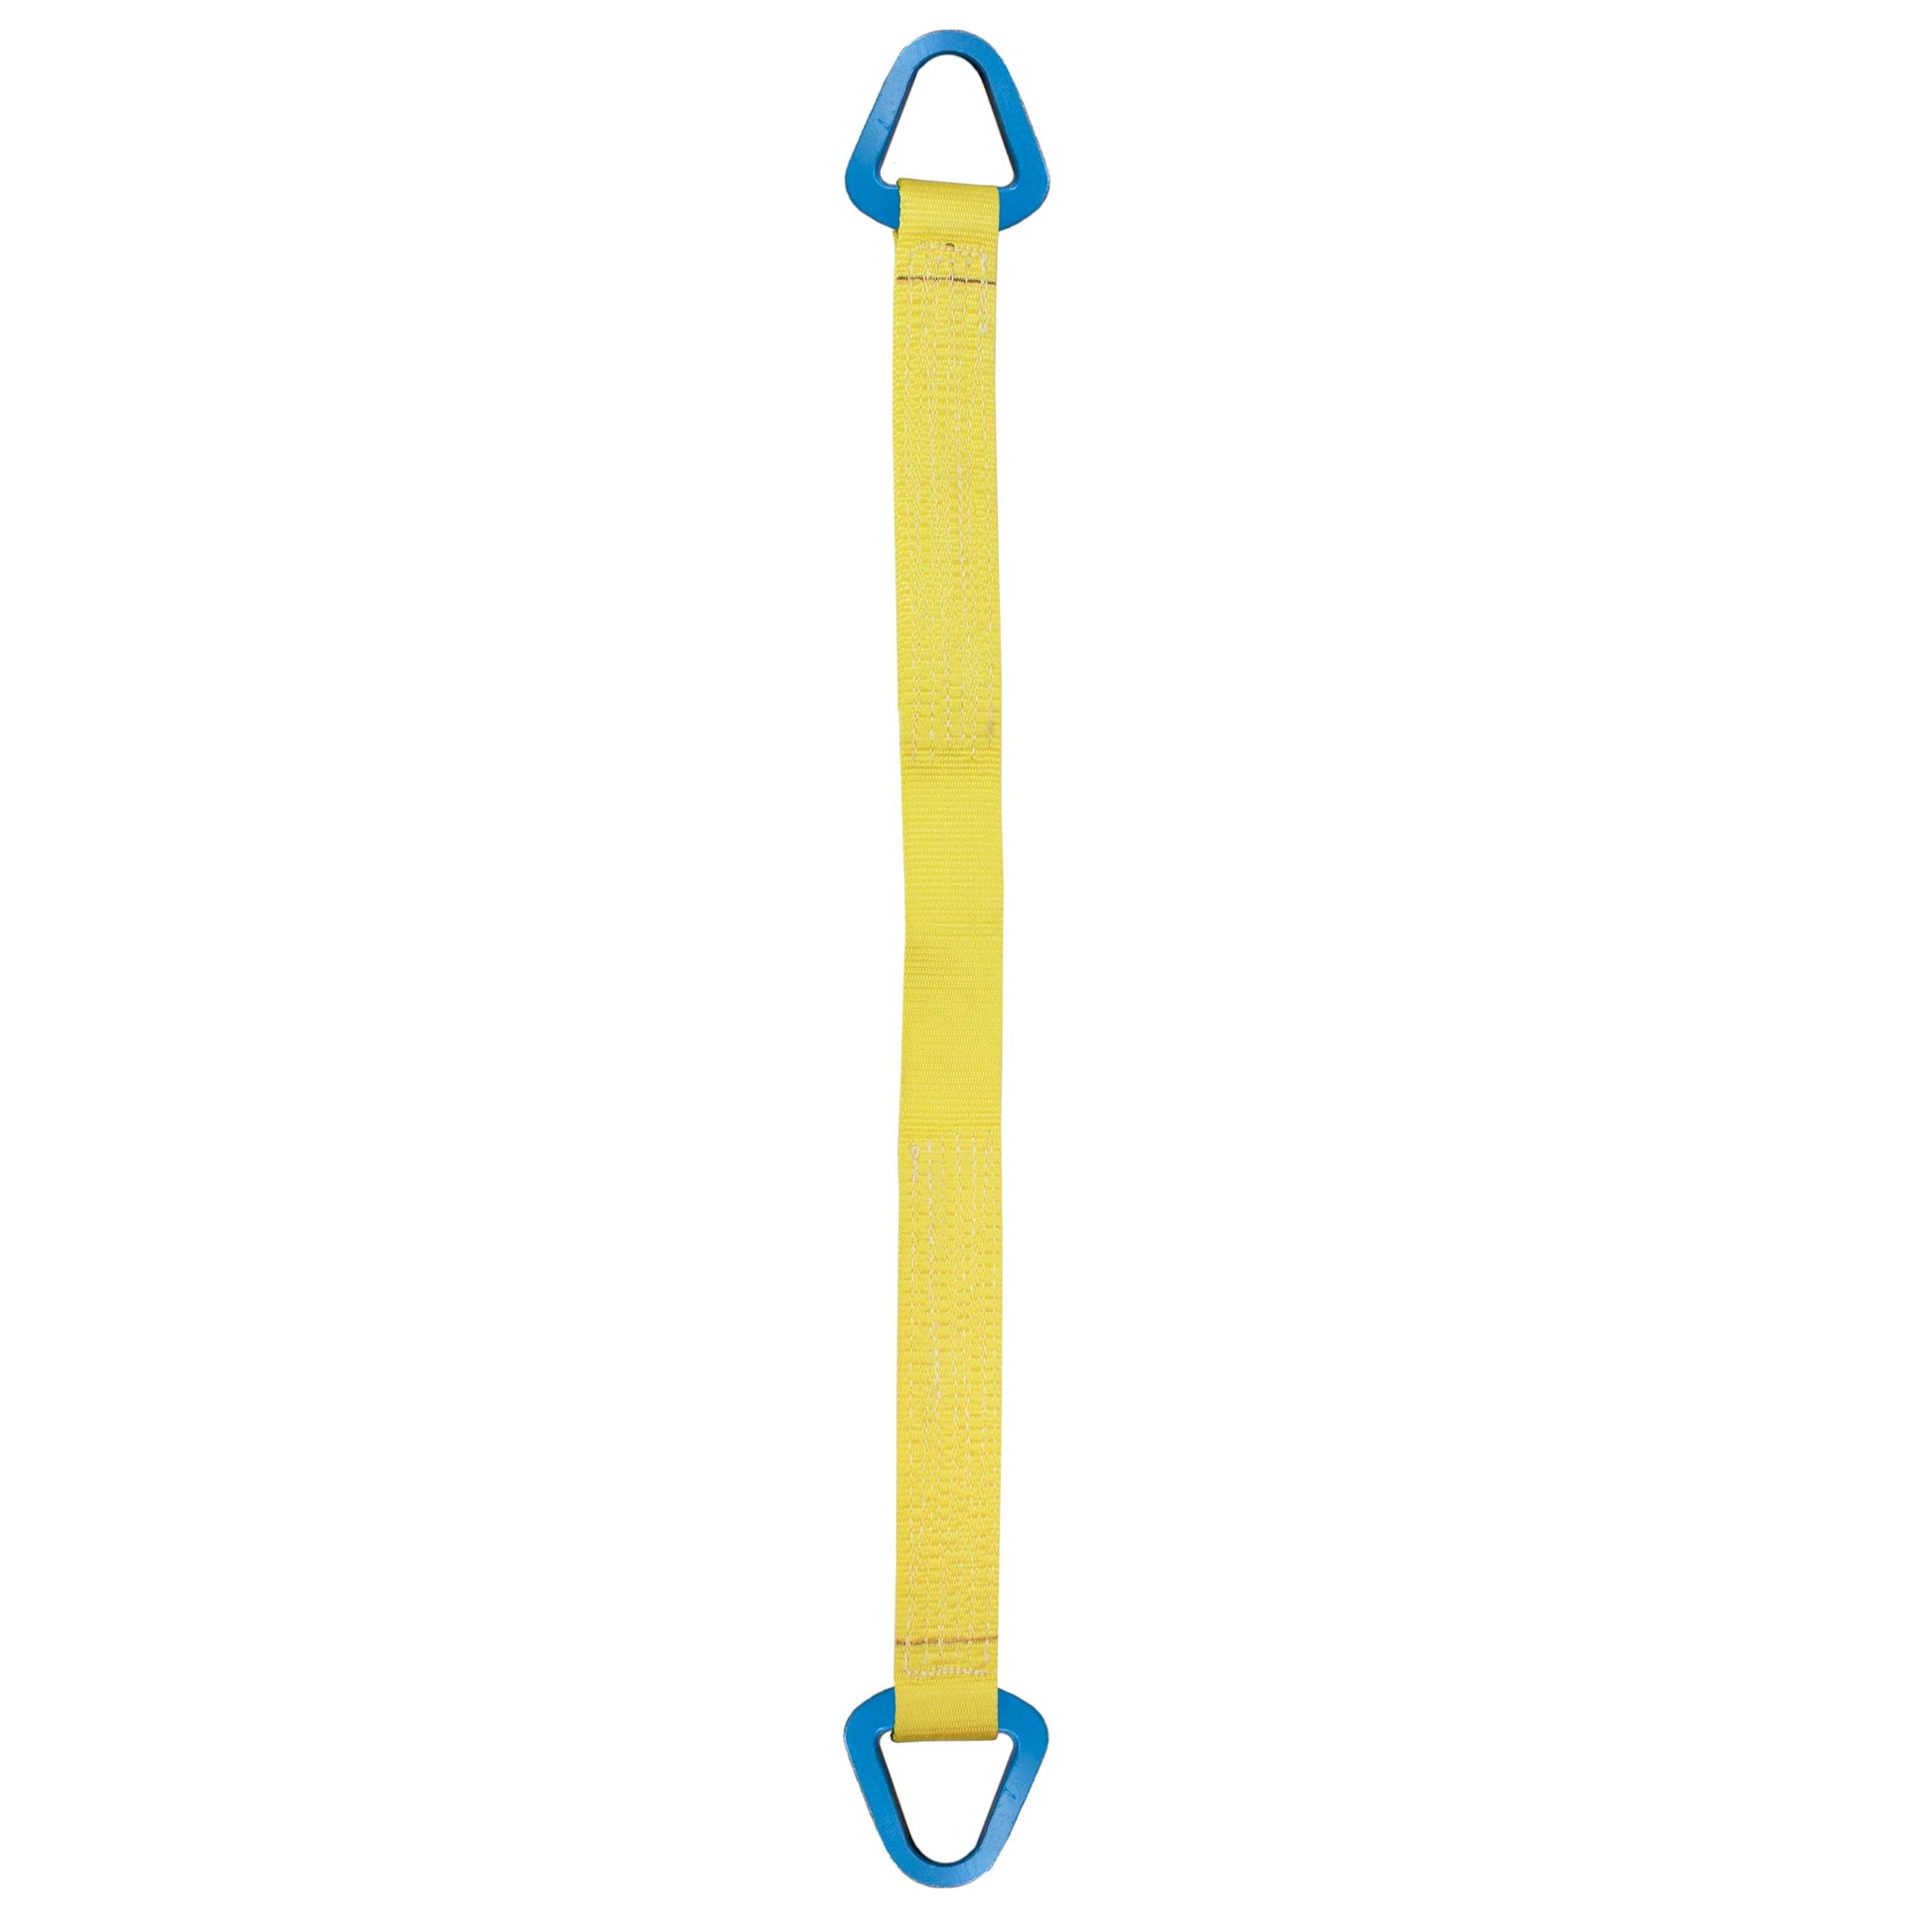 Nylon Lifting Sling Triangle 3 inch x 16 foot 2ply image 1 of 2